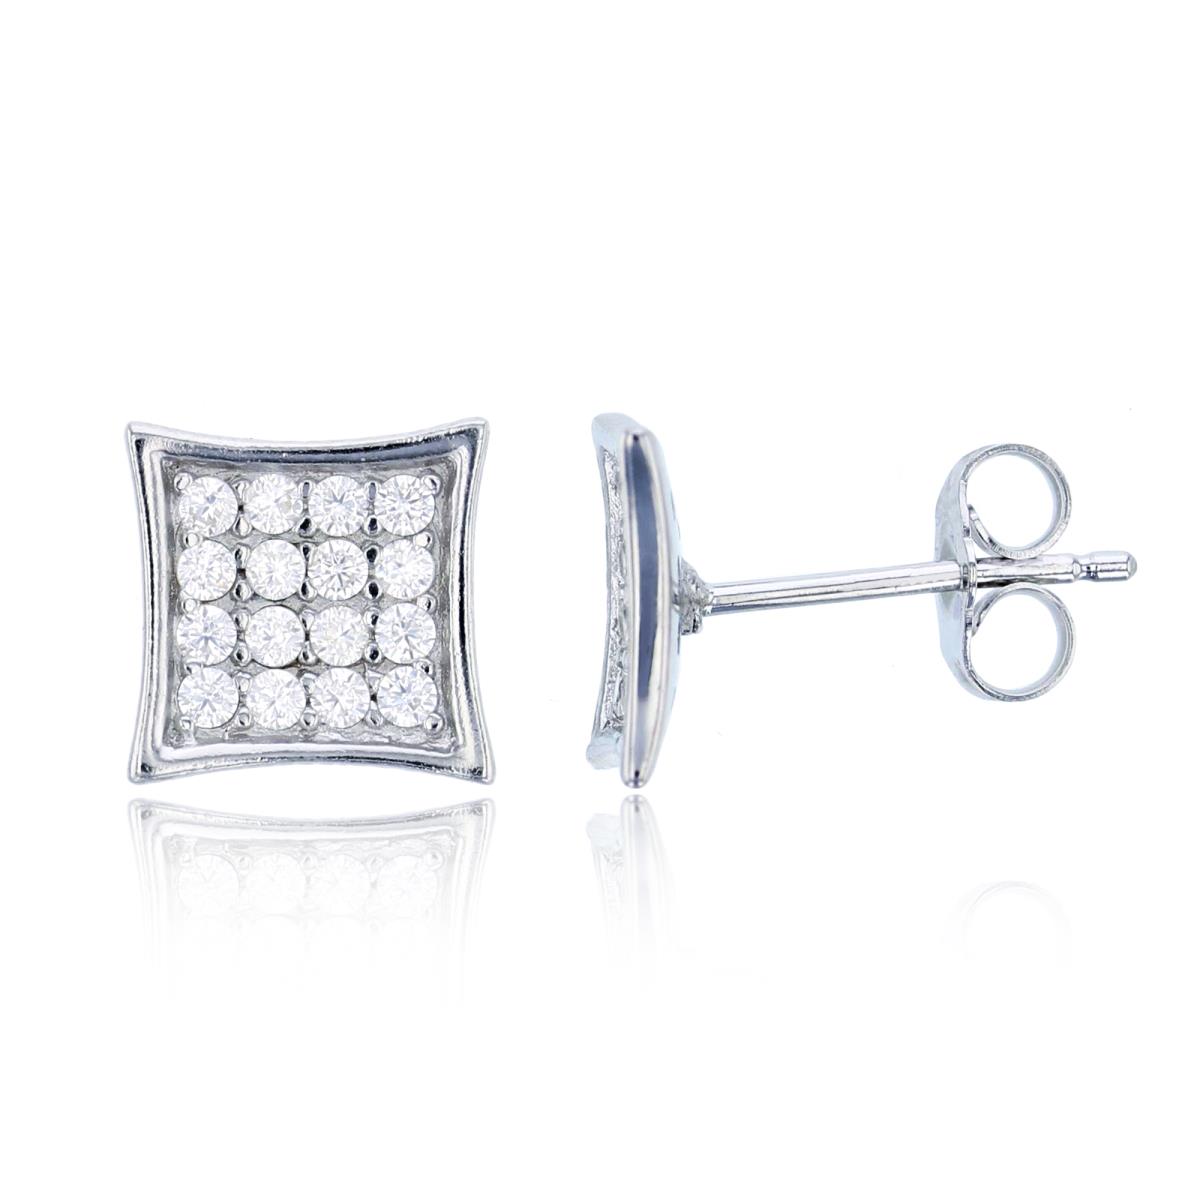 Sterling Silver 4x4mm Curved Square Stud Earring